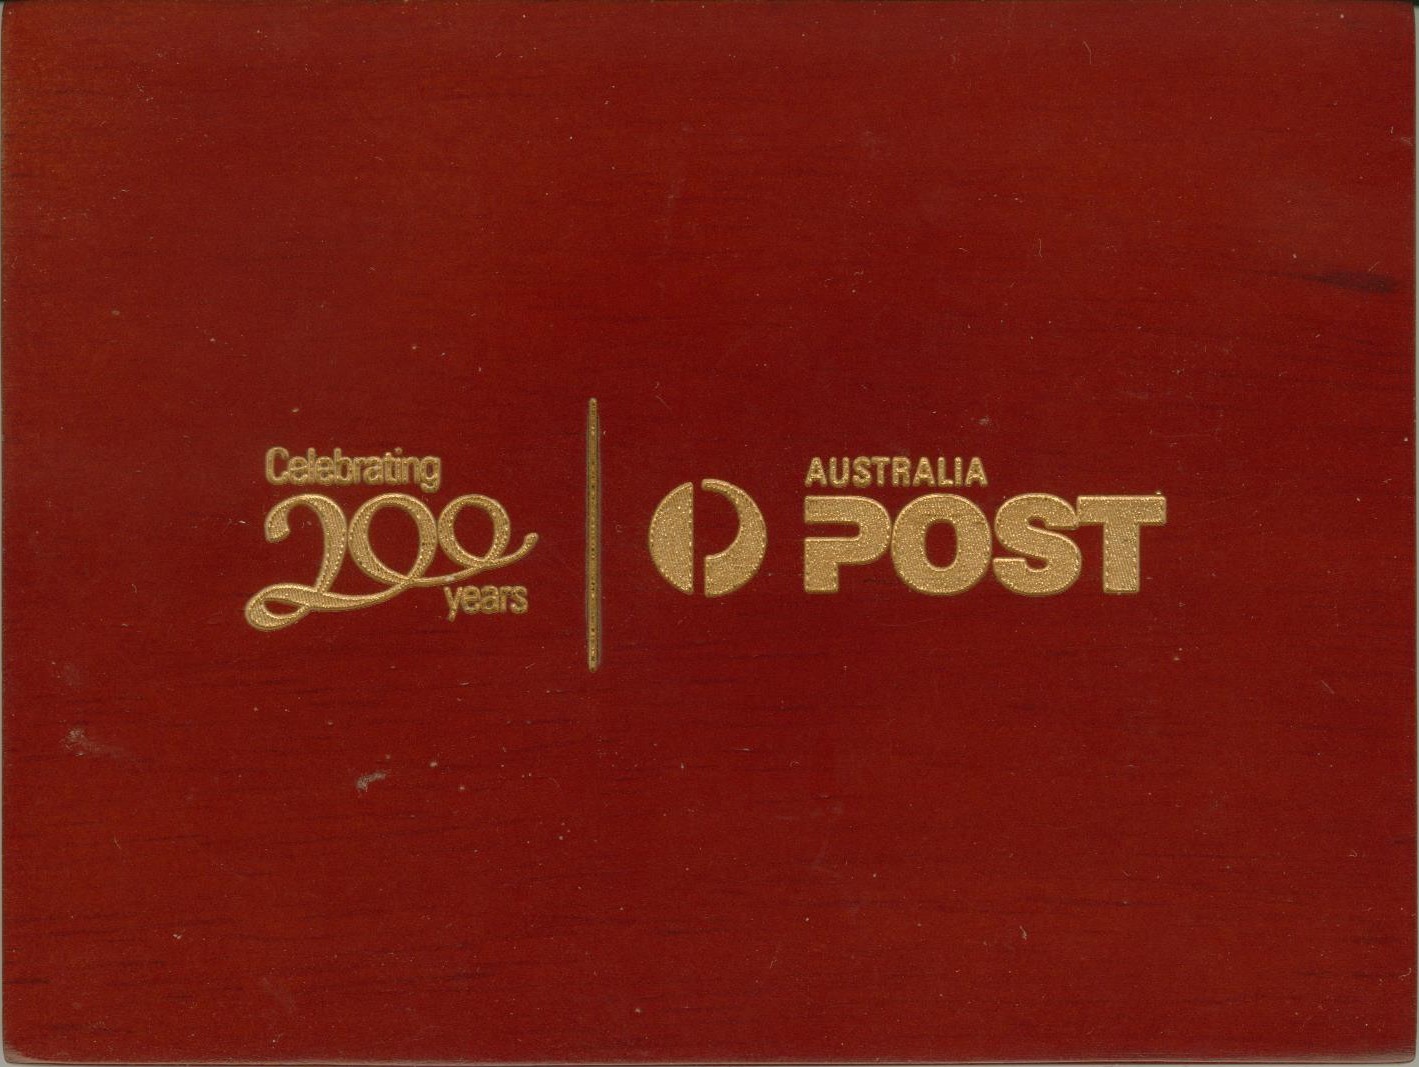 2009 Early Posting Box Stamp-coin Set